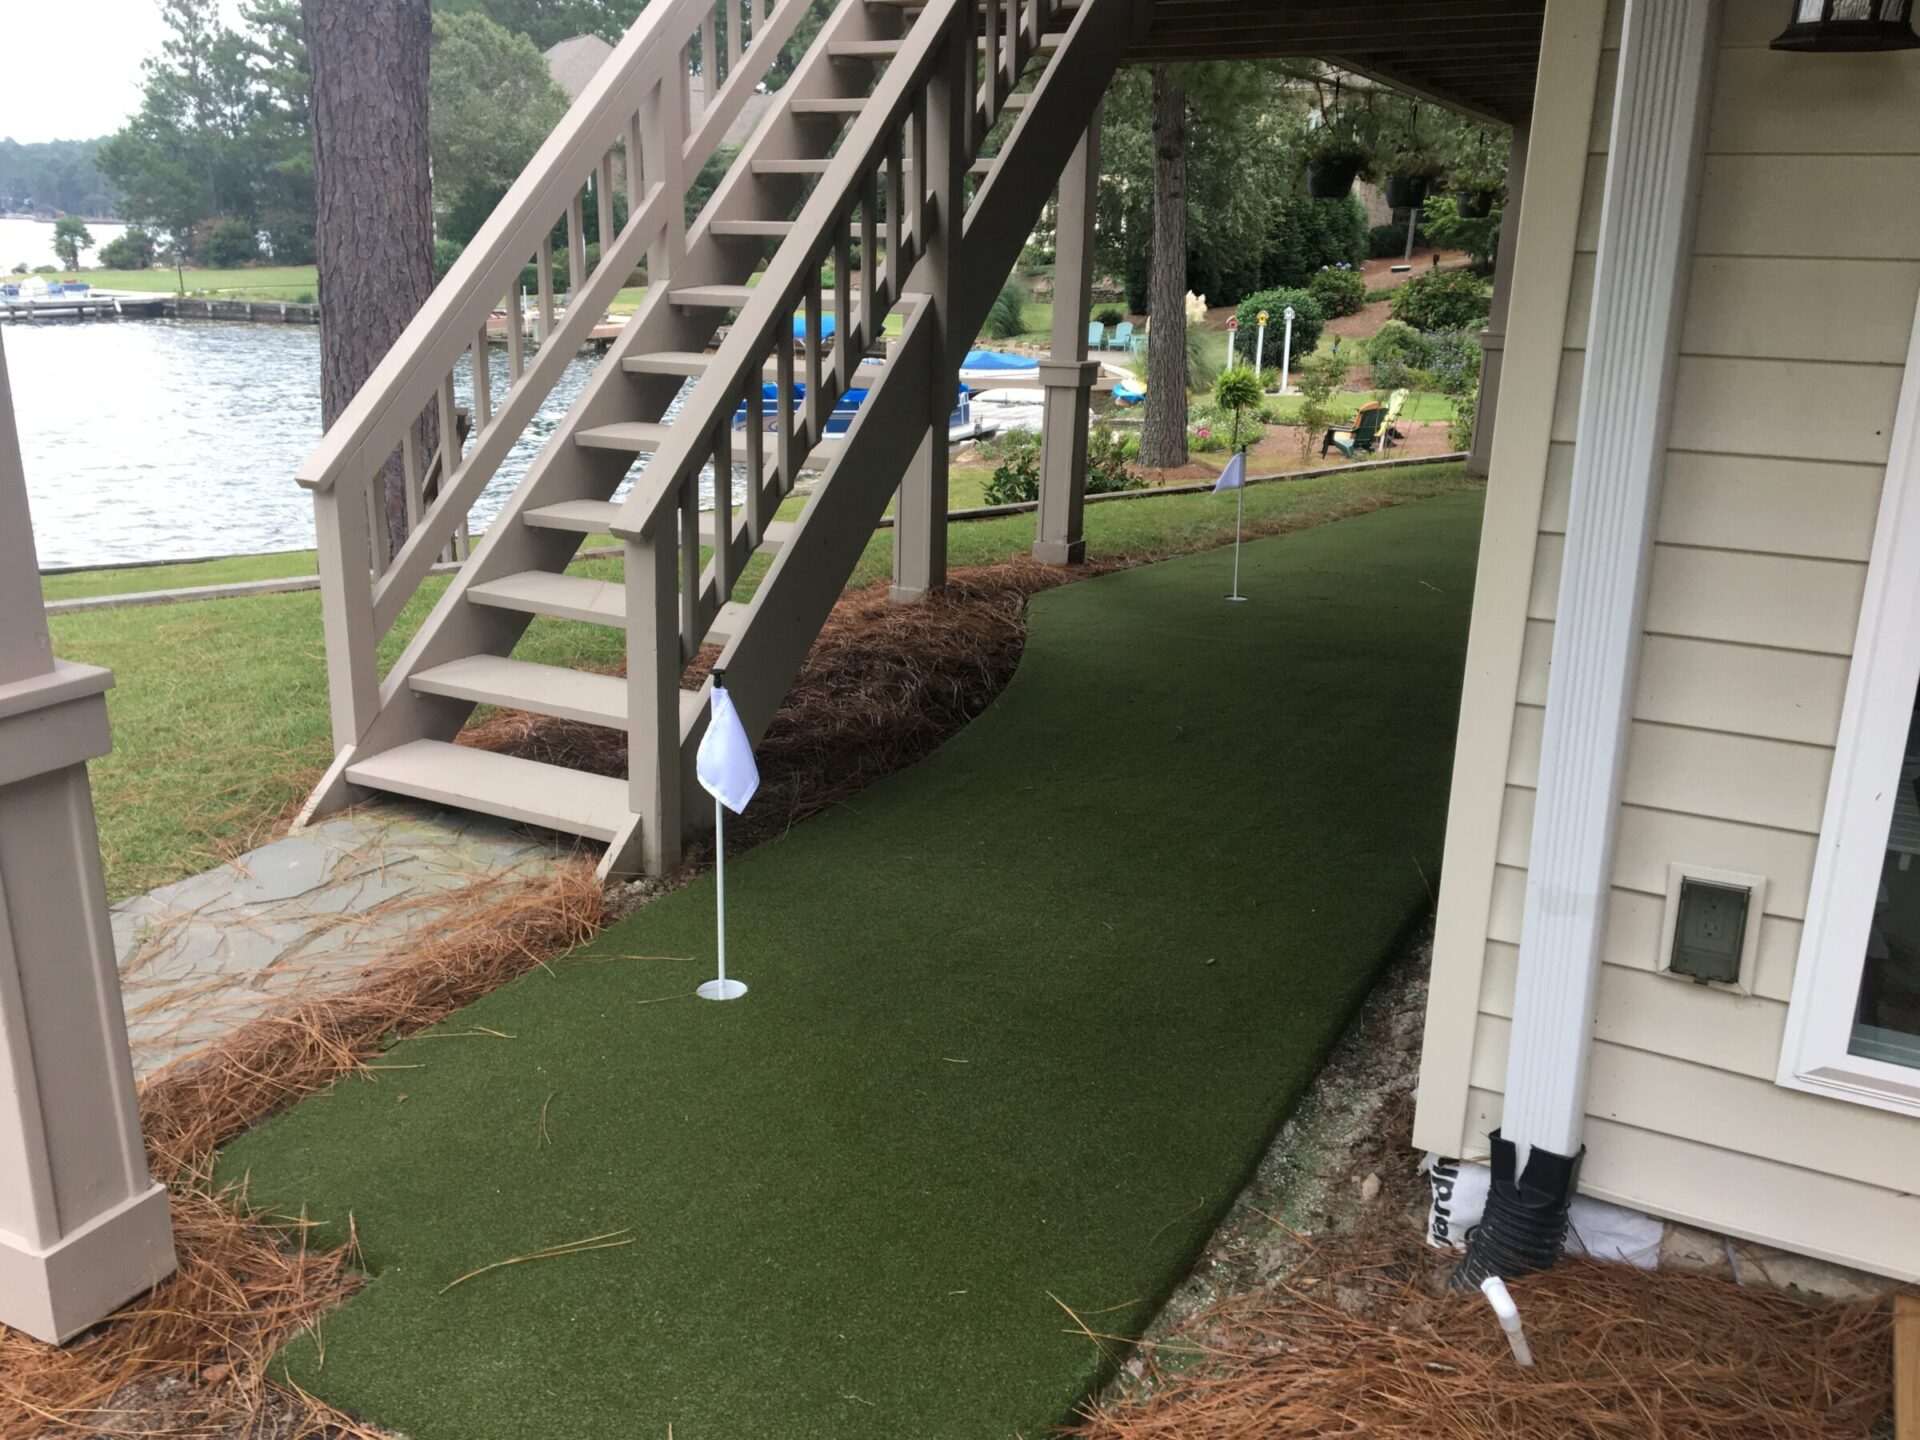 This image shows a home backyard with a narrow artificial putting green for golf, adjacent to stairs leading to a pier by a lake.